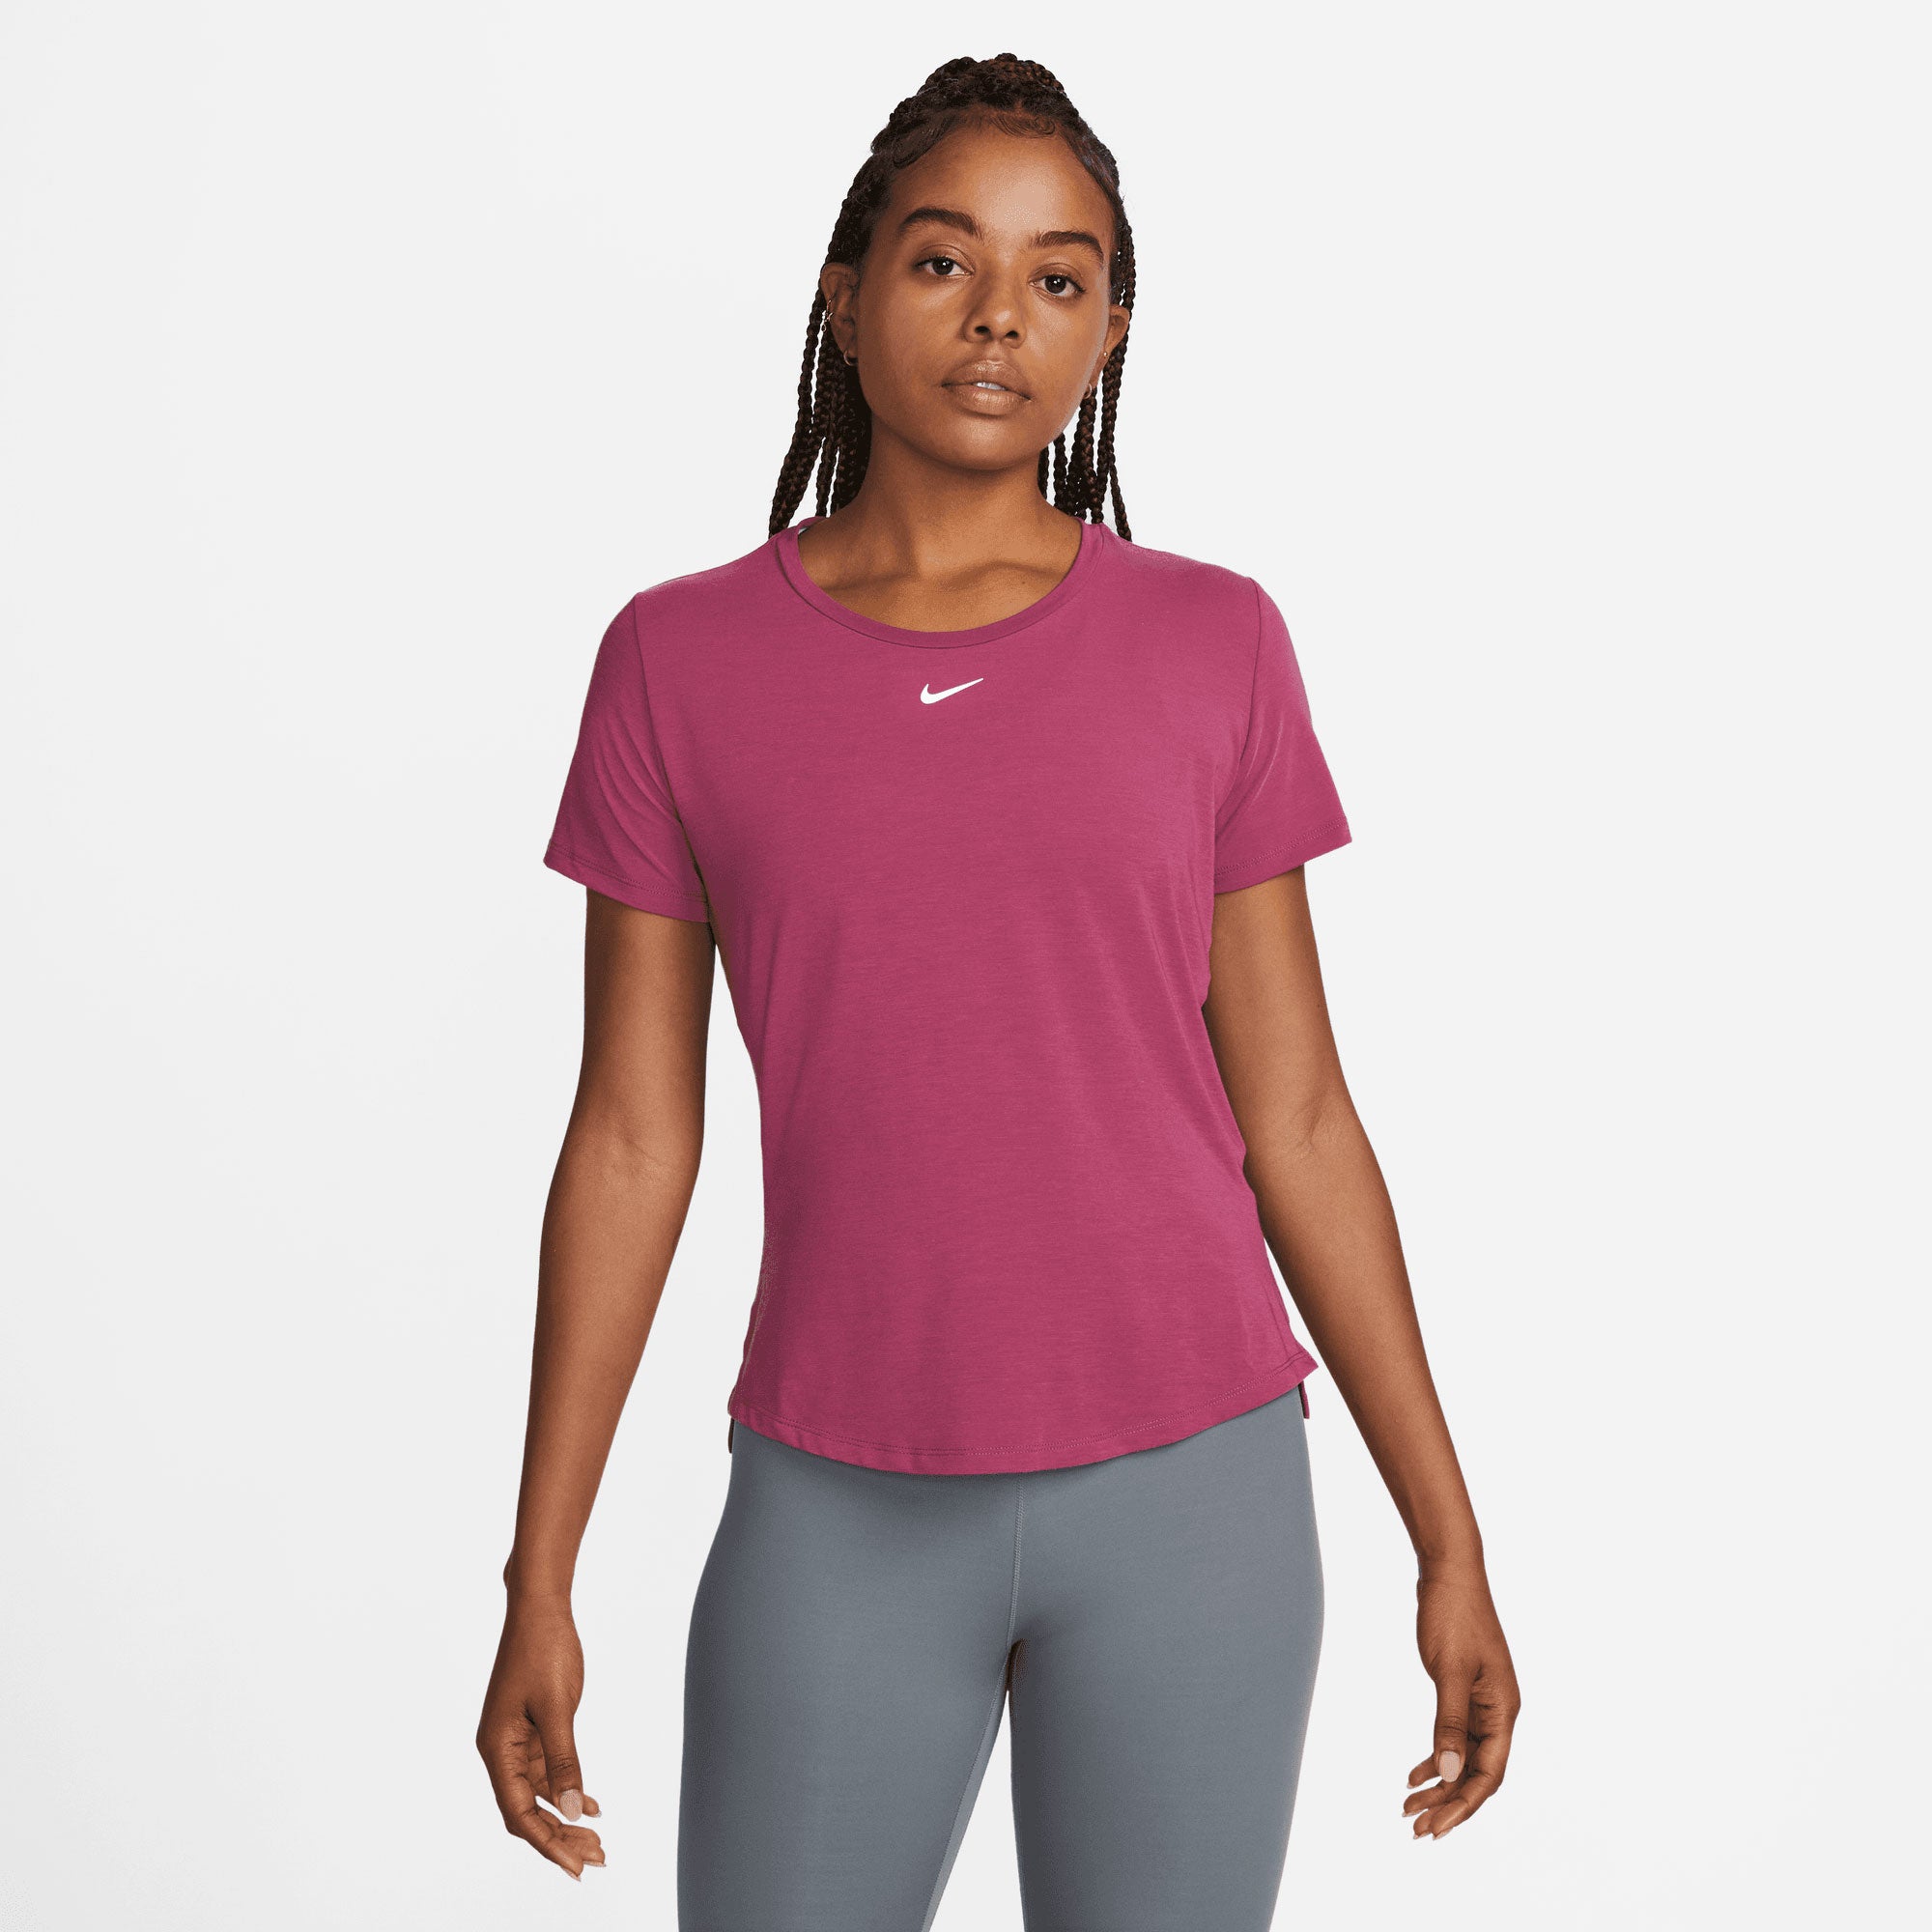 Nike One Luxe Dri-FIT Women's Standard Fit Shirt - Red